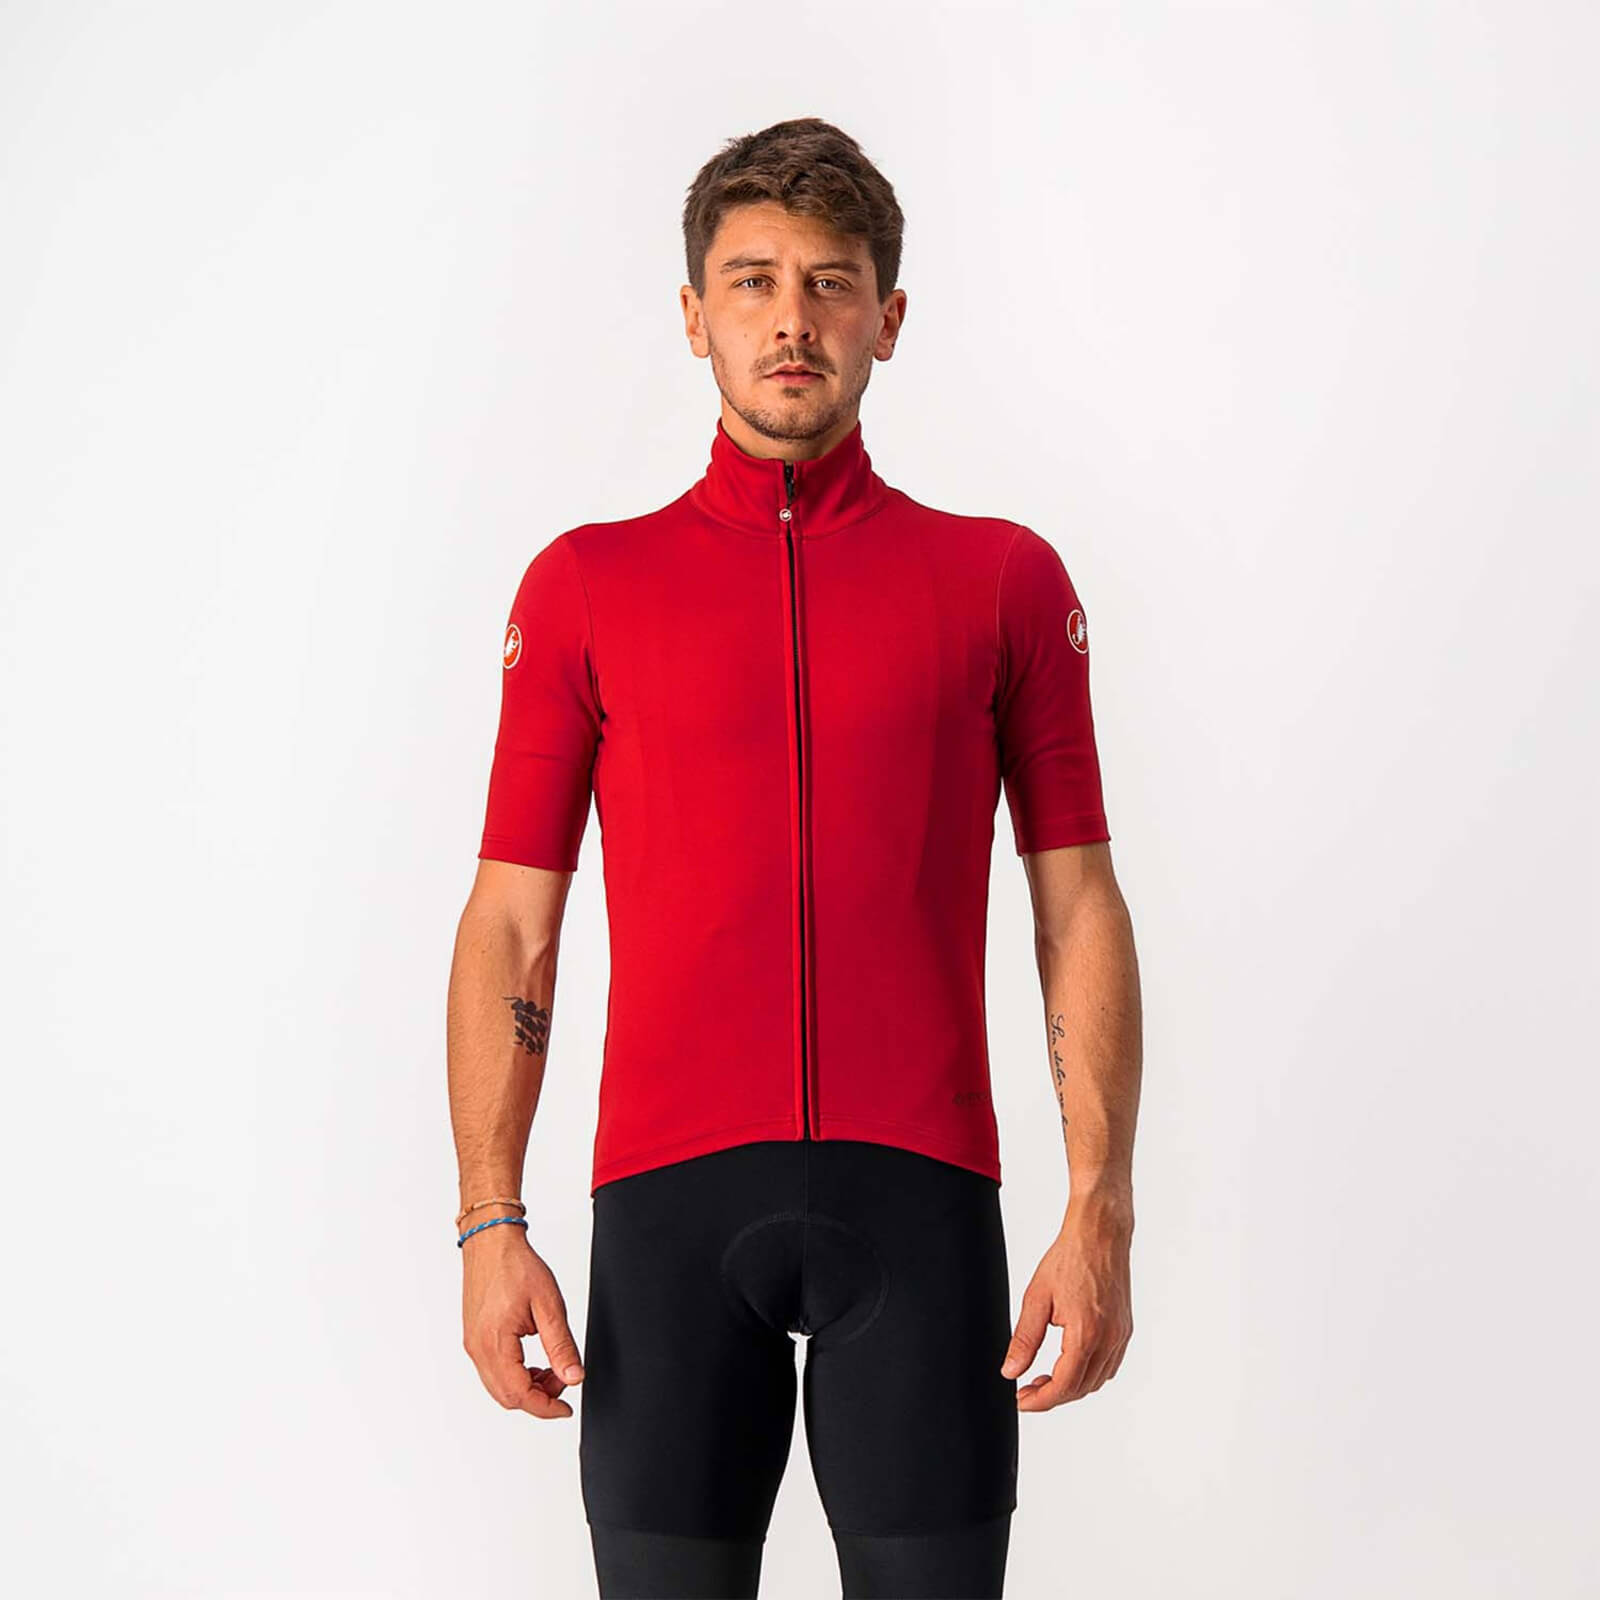 Castelli Perfetto RoS Light Jersey - S - Pro Red